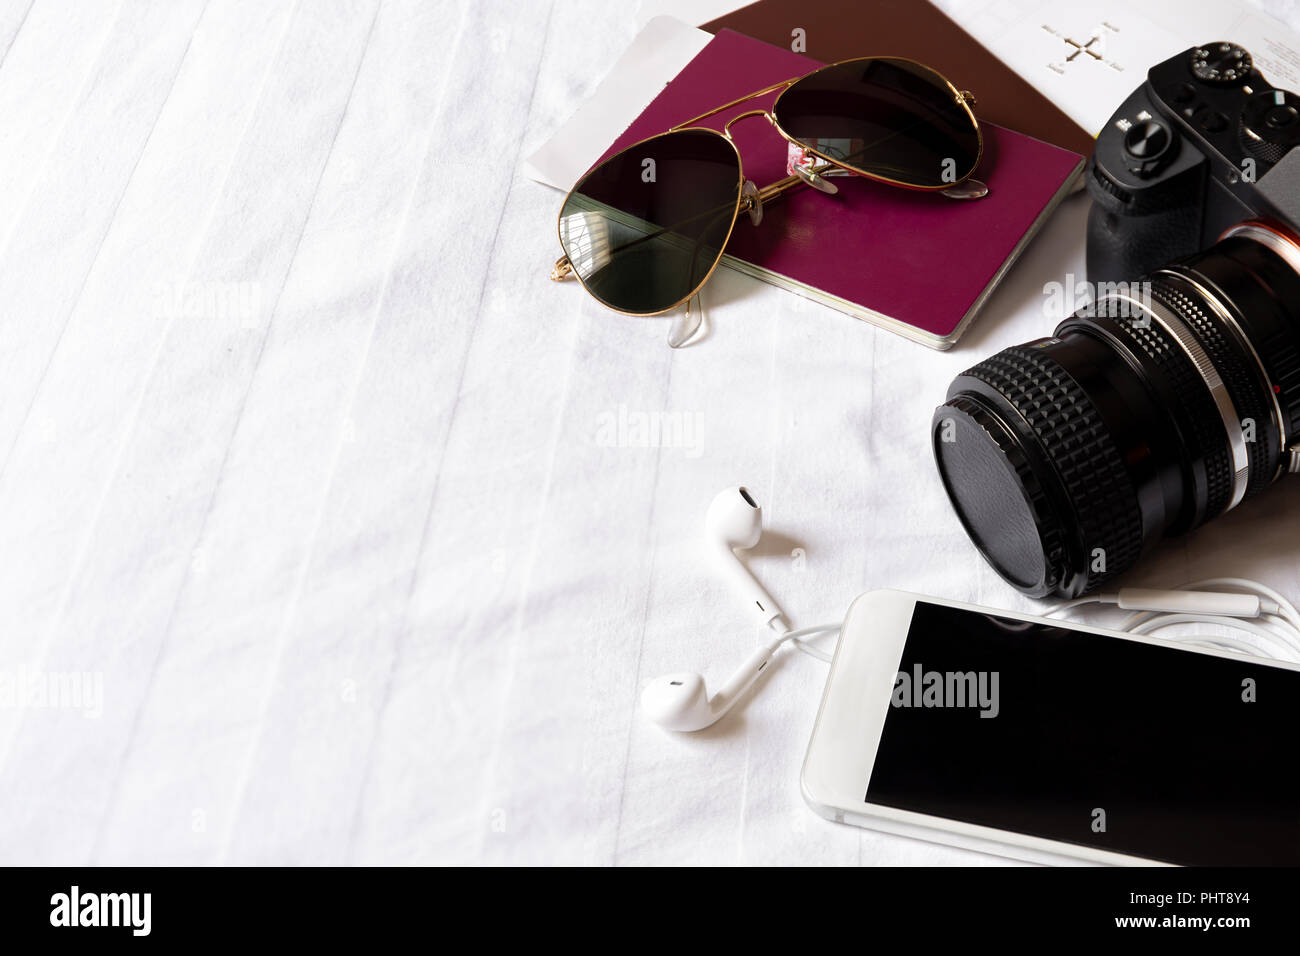 Top view of traveler accessories on the bed with digital camera, cellphone, sunglasses and passport. Stock Photo